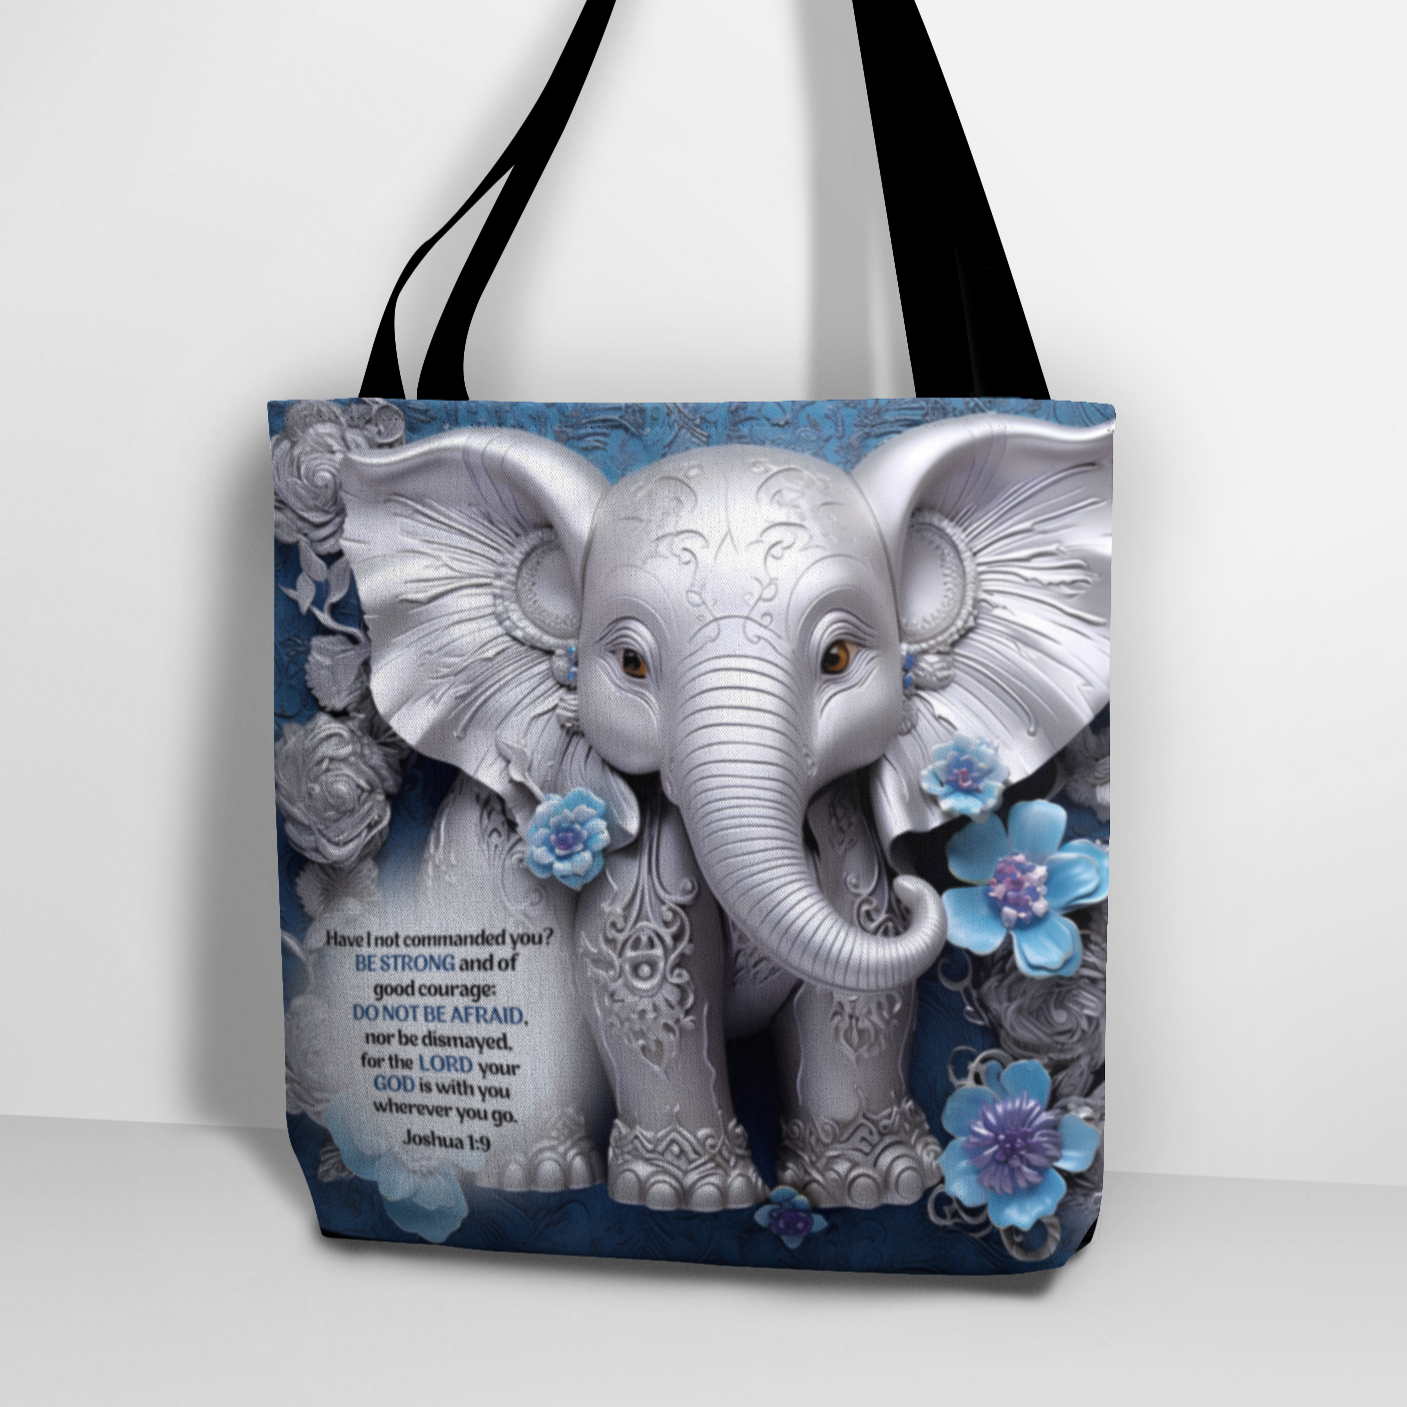 3D Elephant Tote Bag With Bible Verse Joshua 1:9